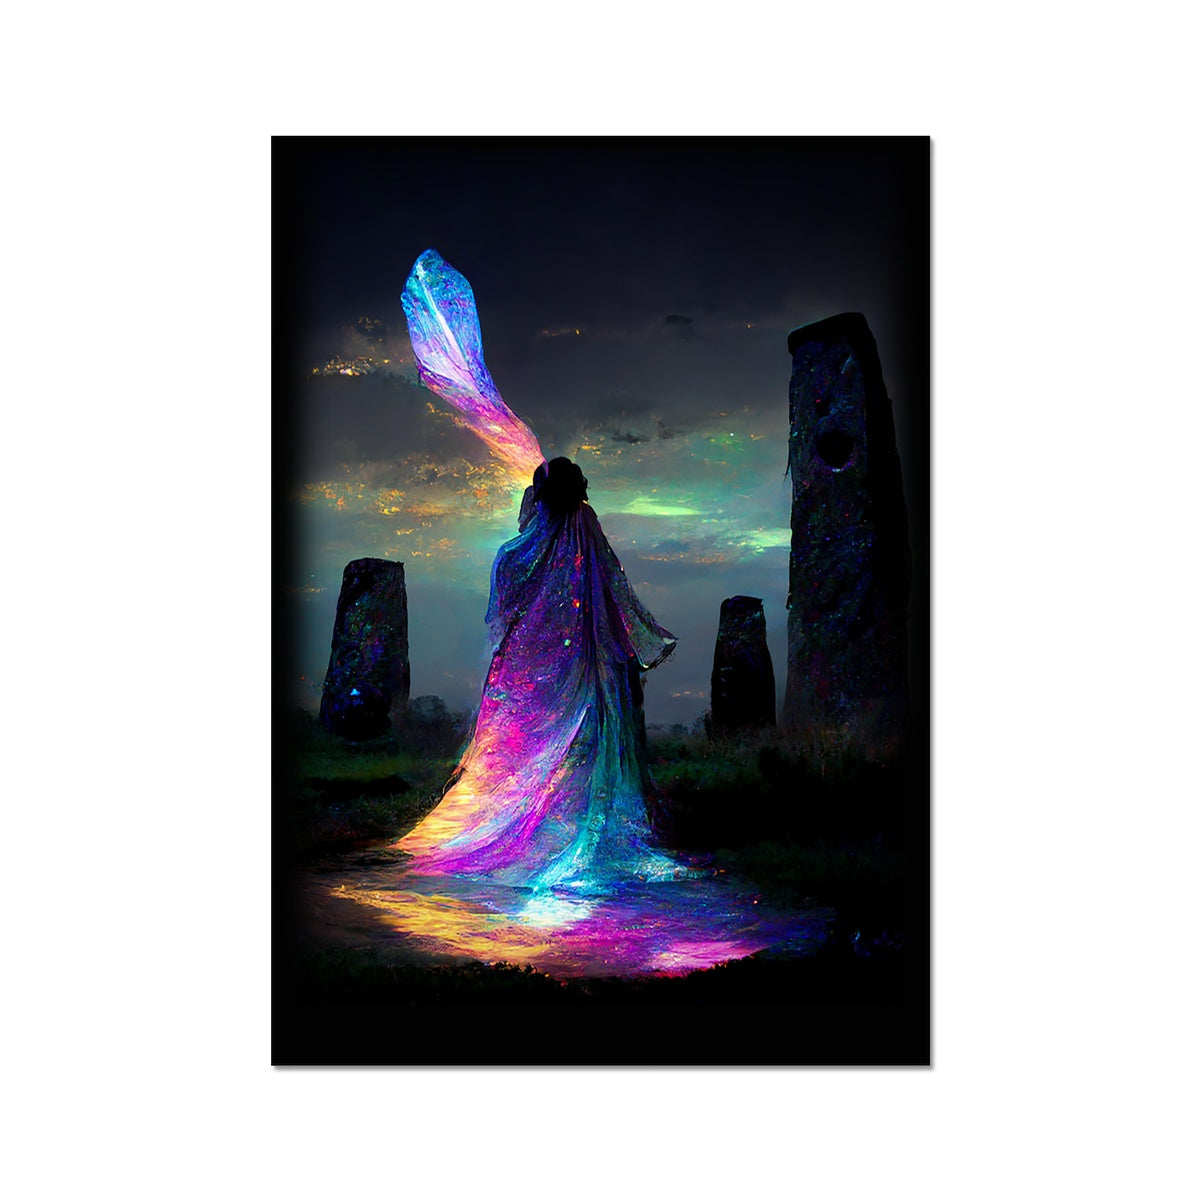 Iridescent energy fairy amongst ancient standing stones 1 Wall Art Poster